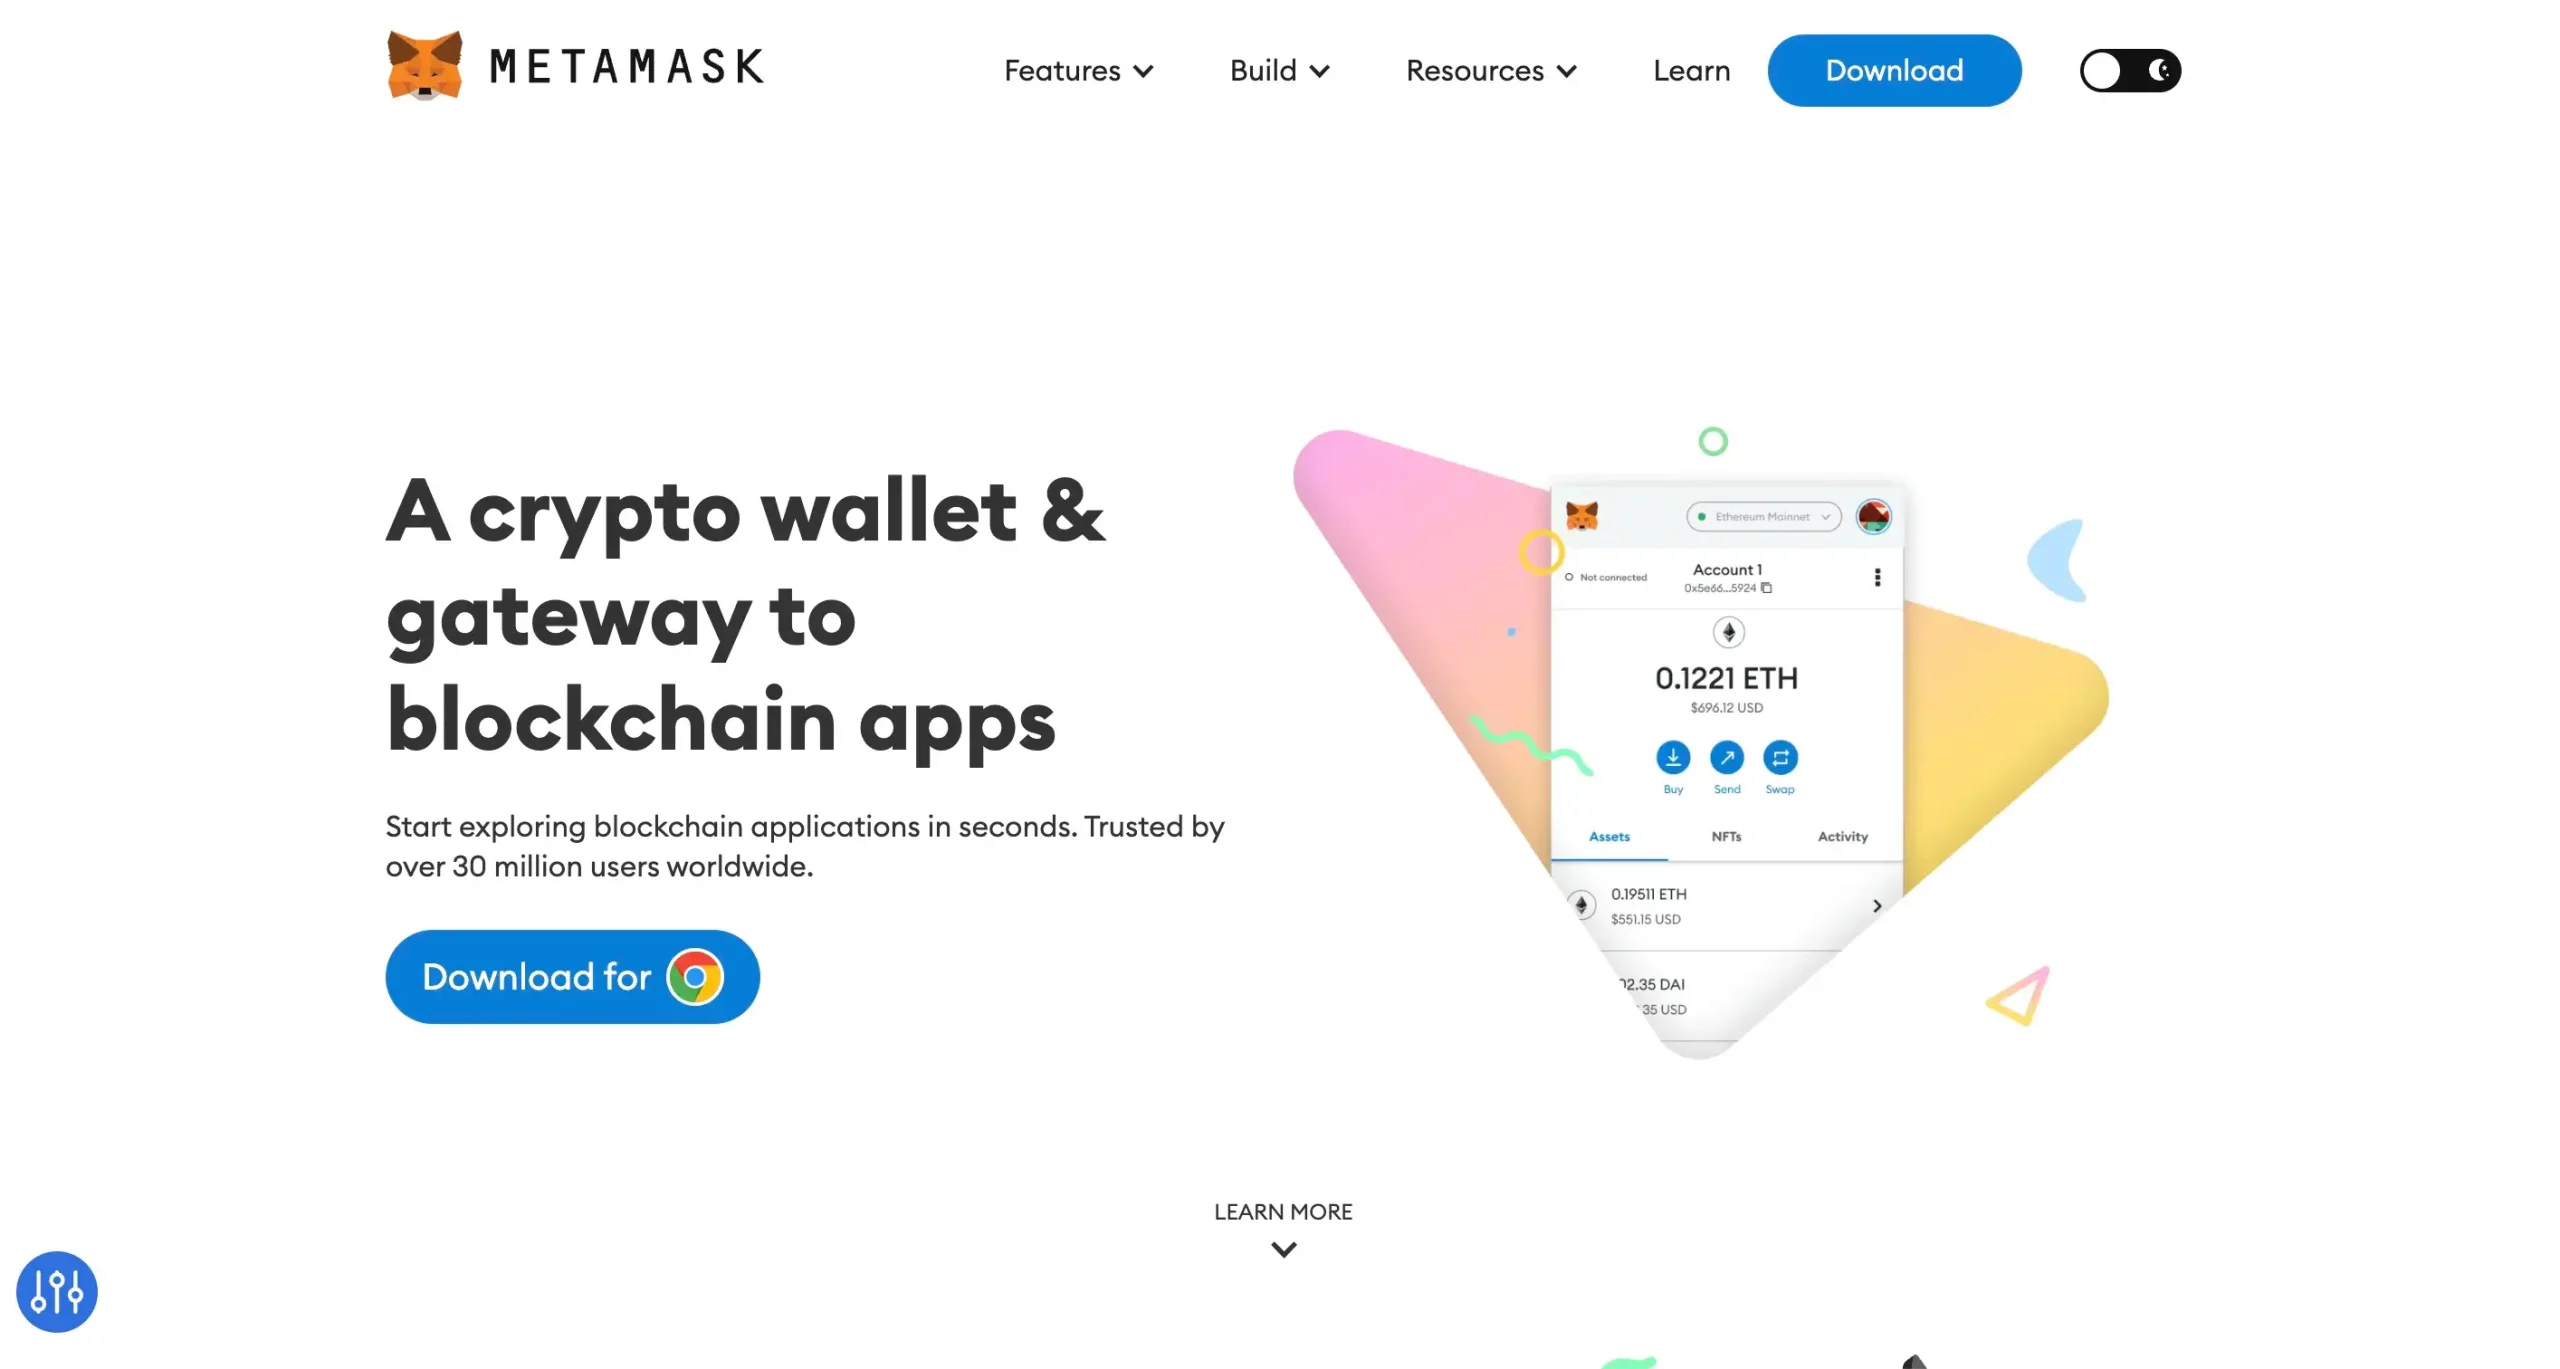 3. Best Ethereum Wallet for Accessibility: MetaMask 